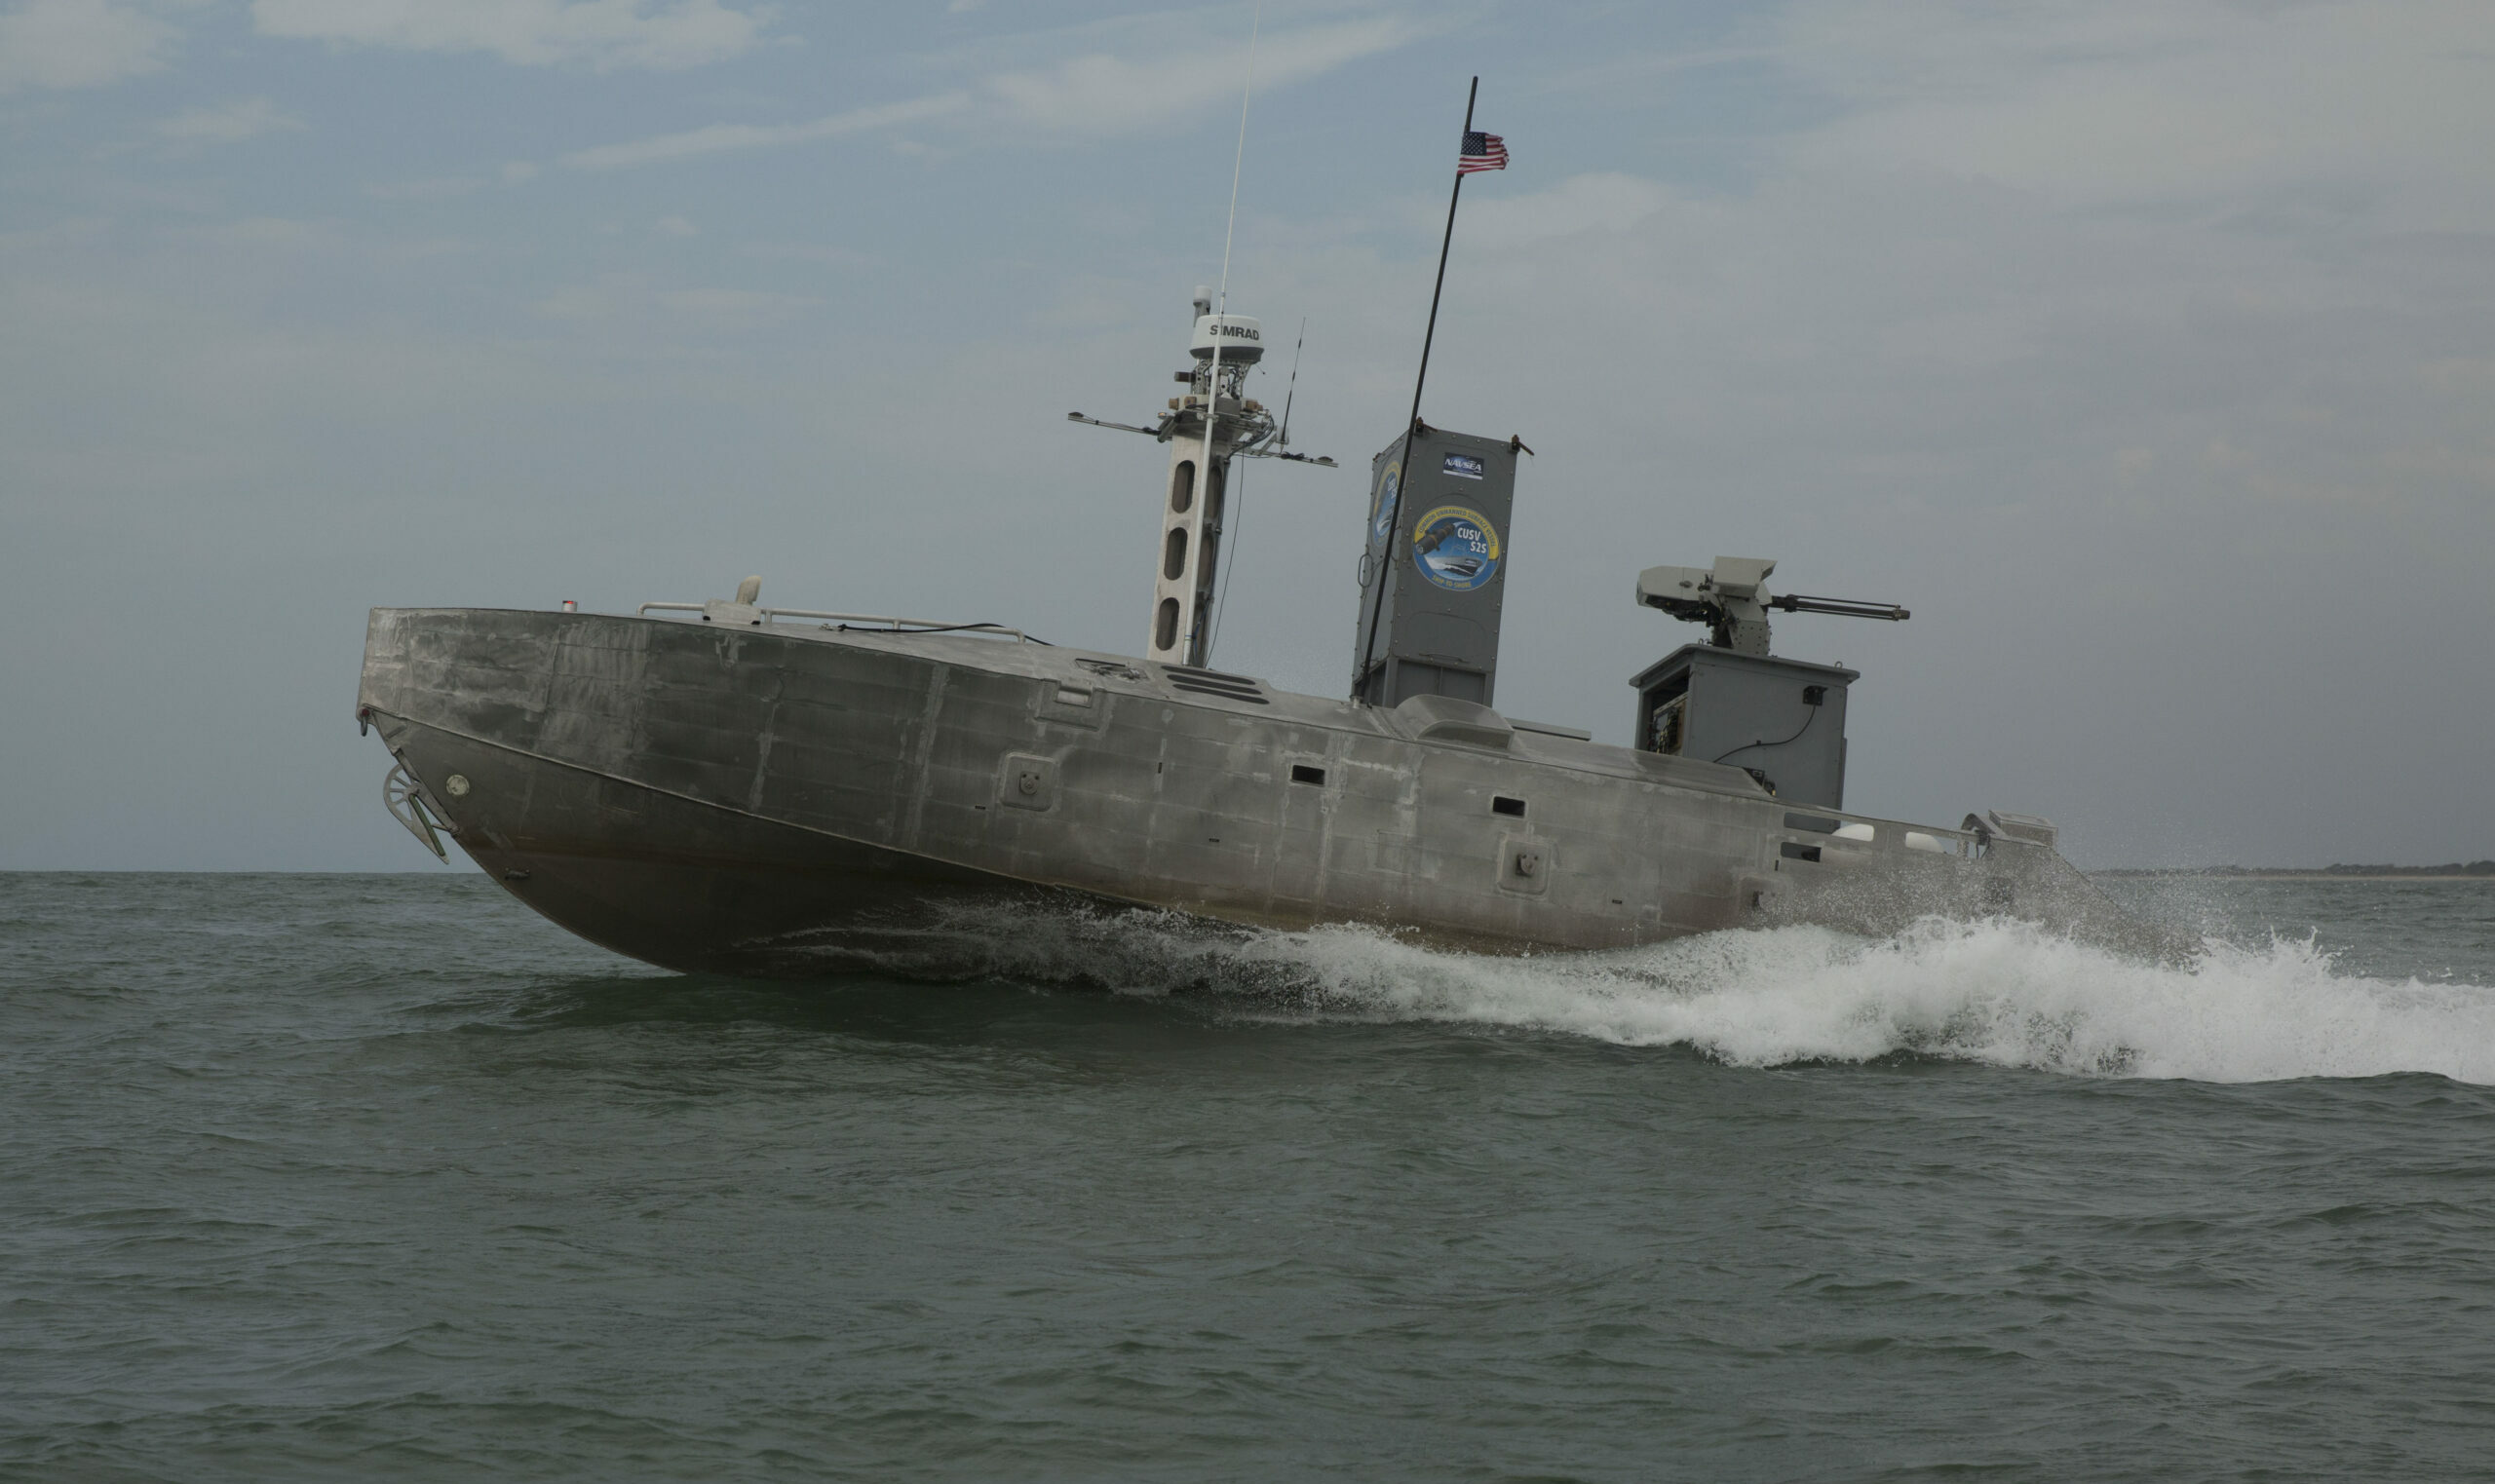 US expeditionary unmanned surface vessel